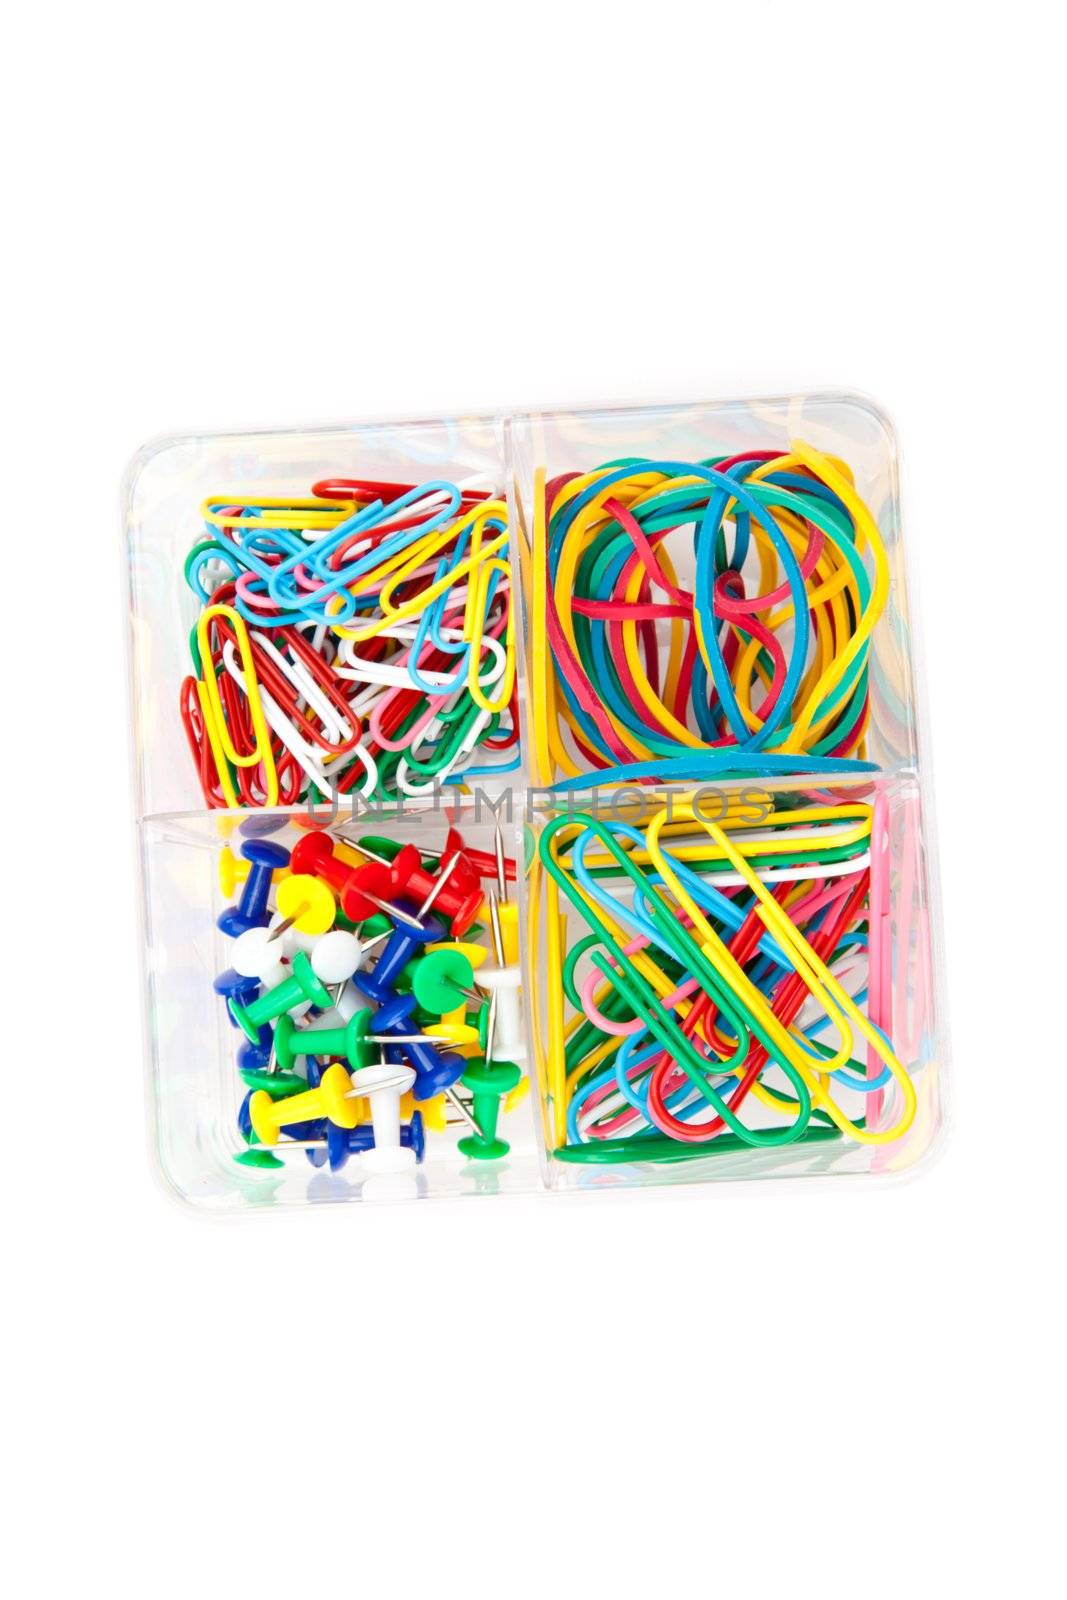 Box of multicolored of pushpins paperclips and elastics against a white background